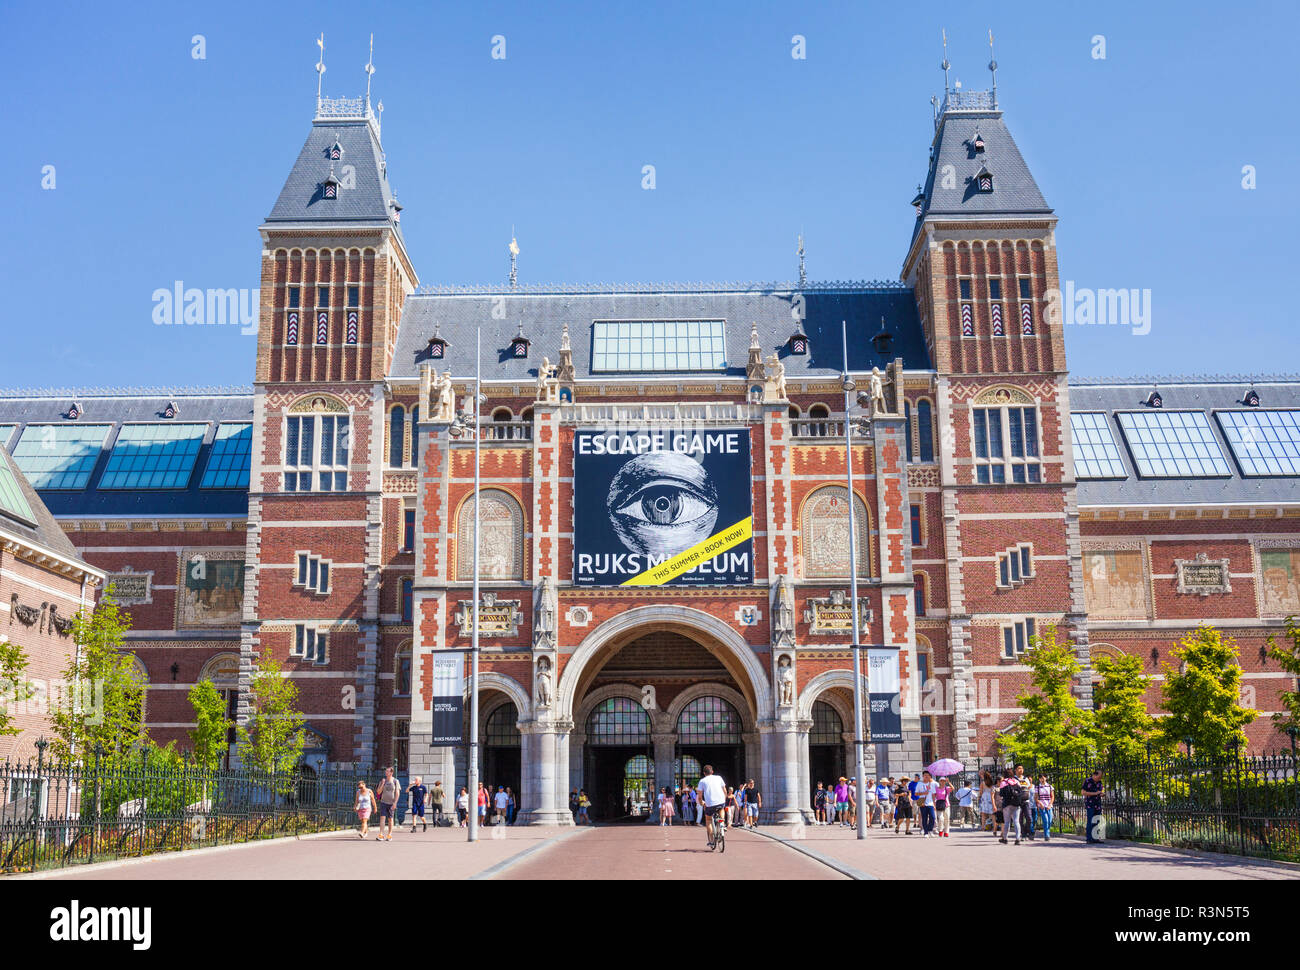 Rijksmuseum Amsterdam Amsterdam museum and art gallery art collection Holland Pays-bas eu Europe Banque D'Images